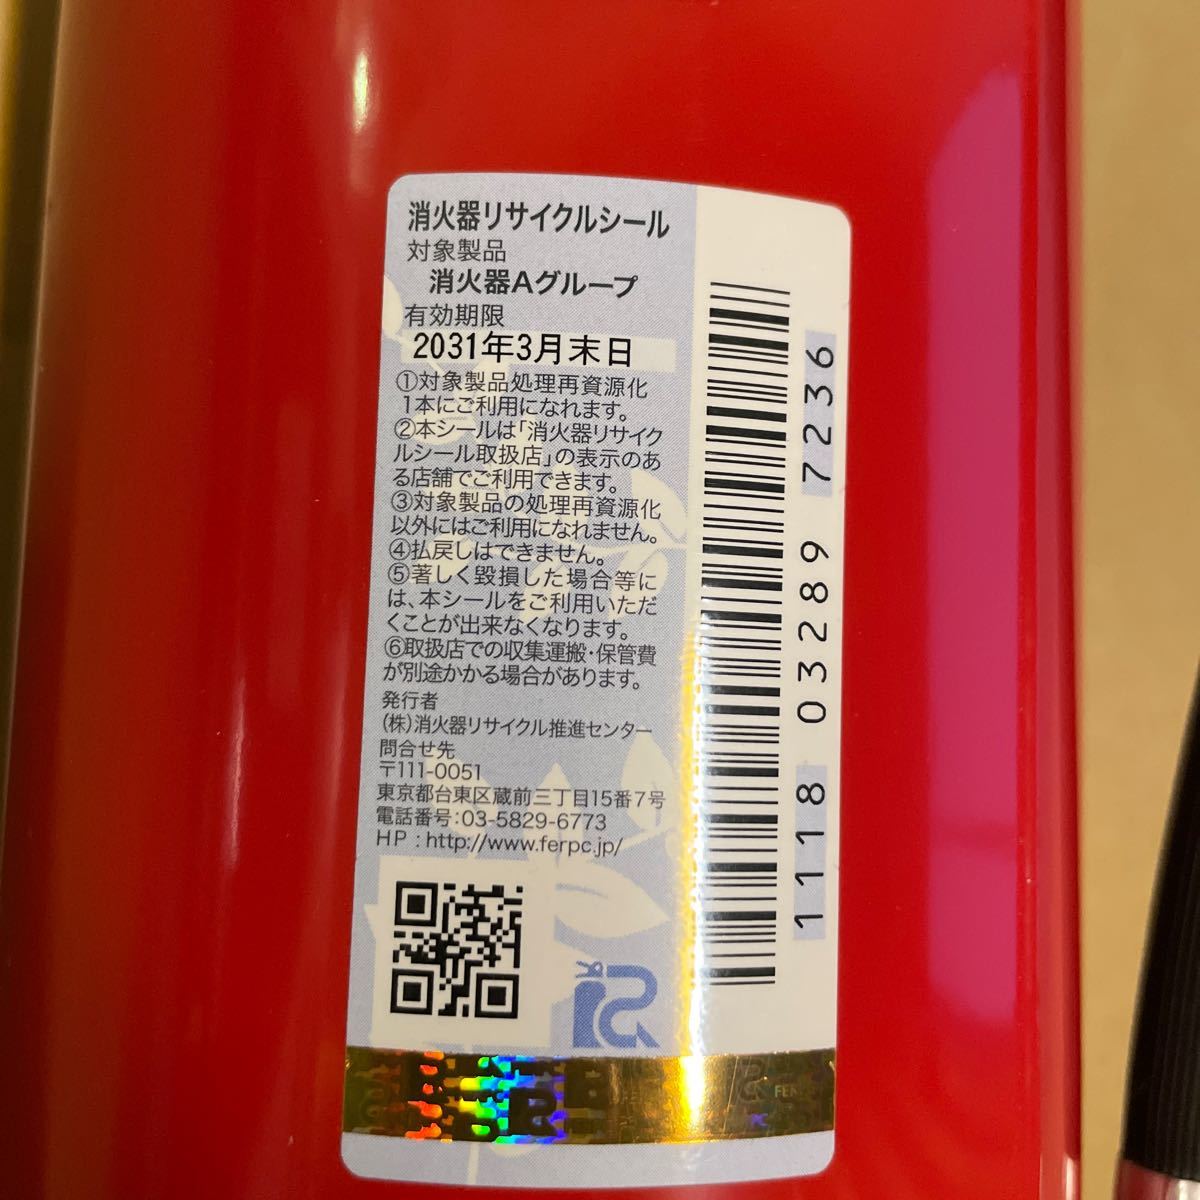  Morita . rice field industry powder ABC fire extinguisher standard use time limit 2028 year 